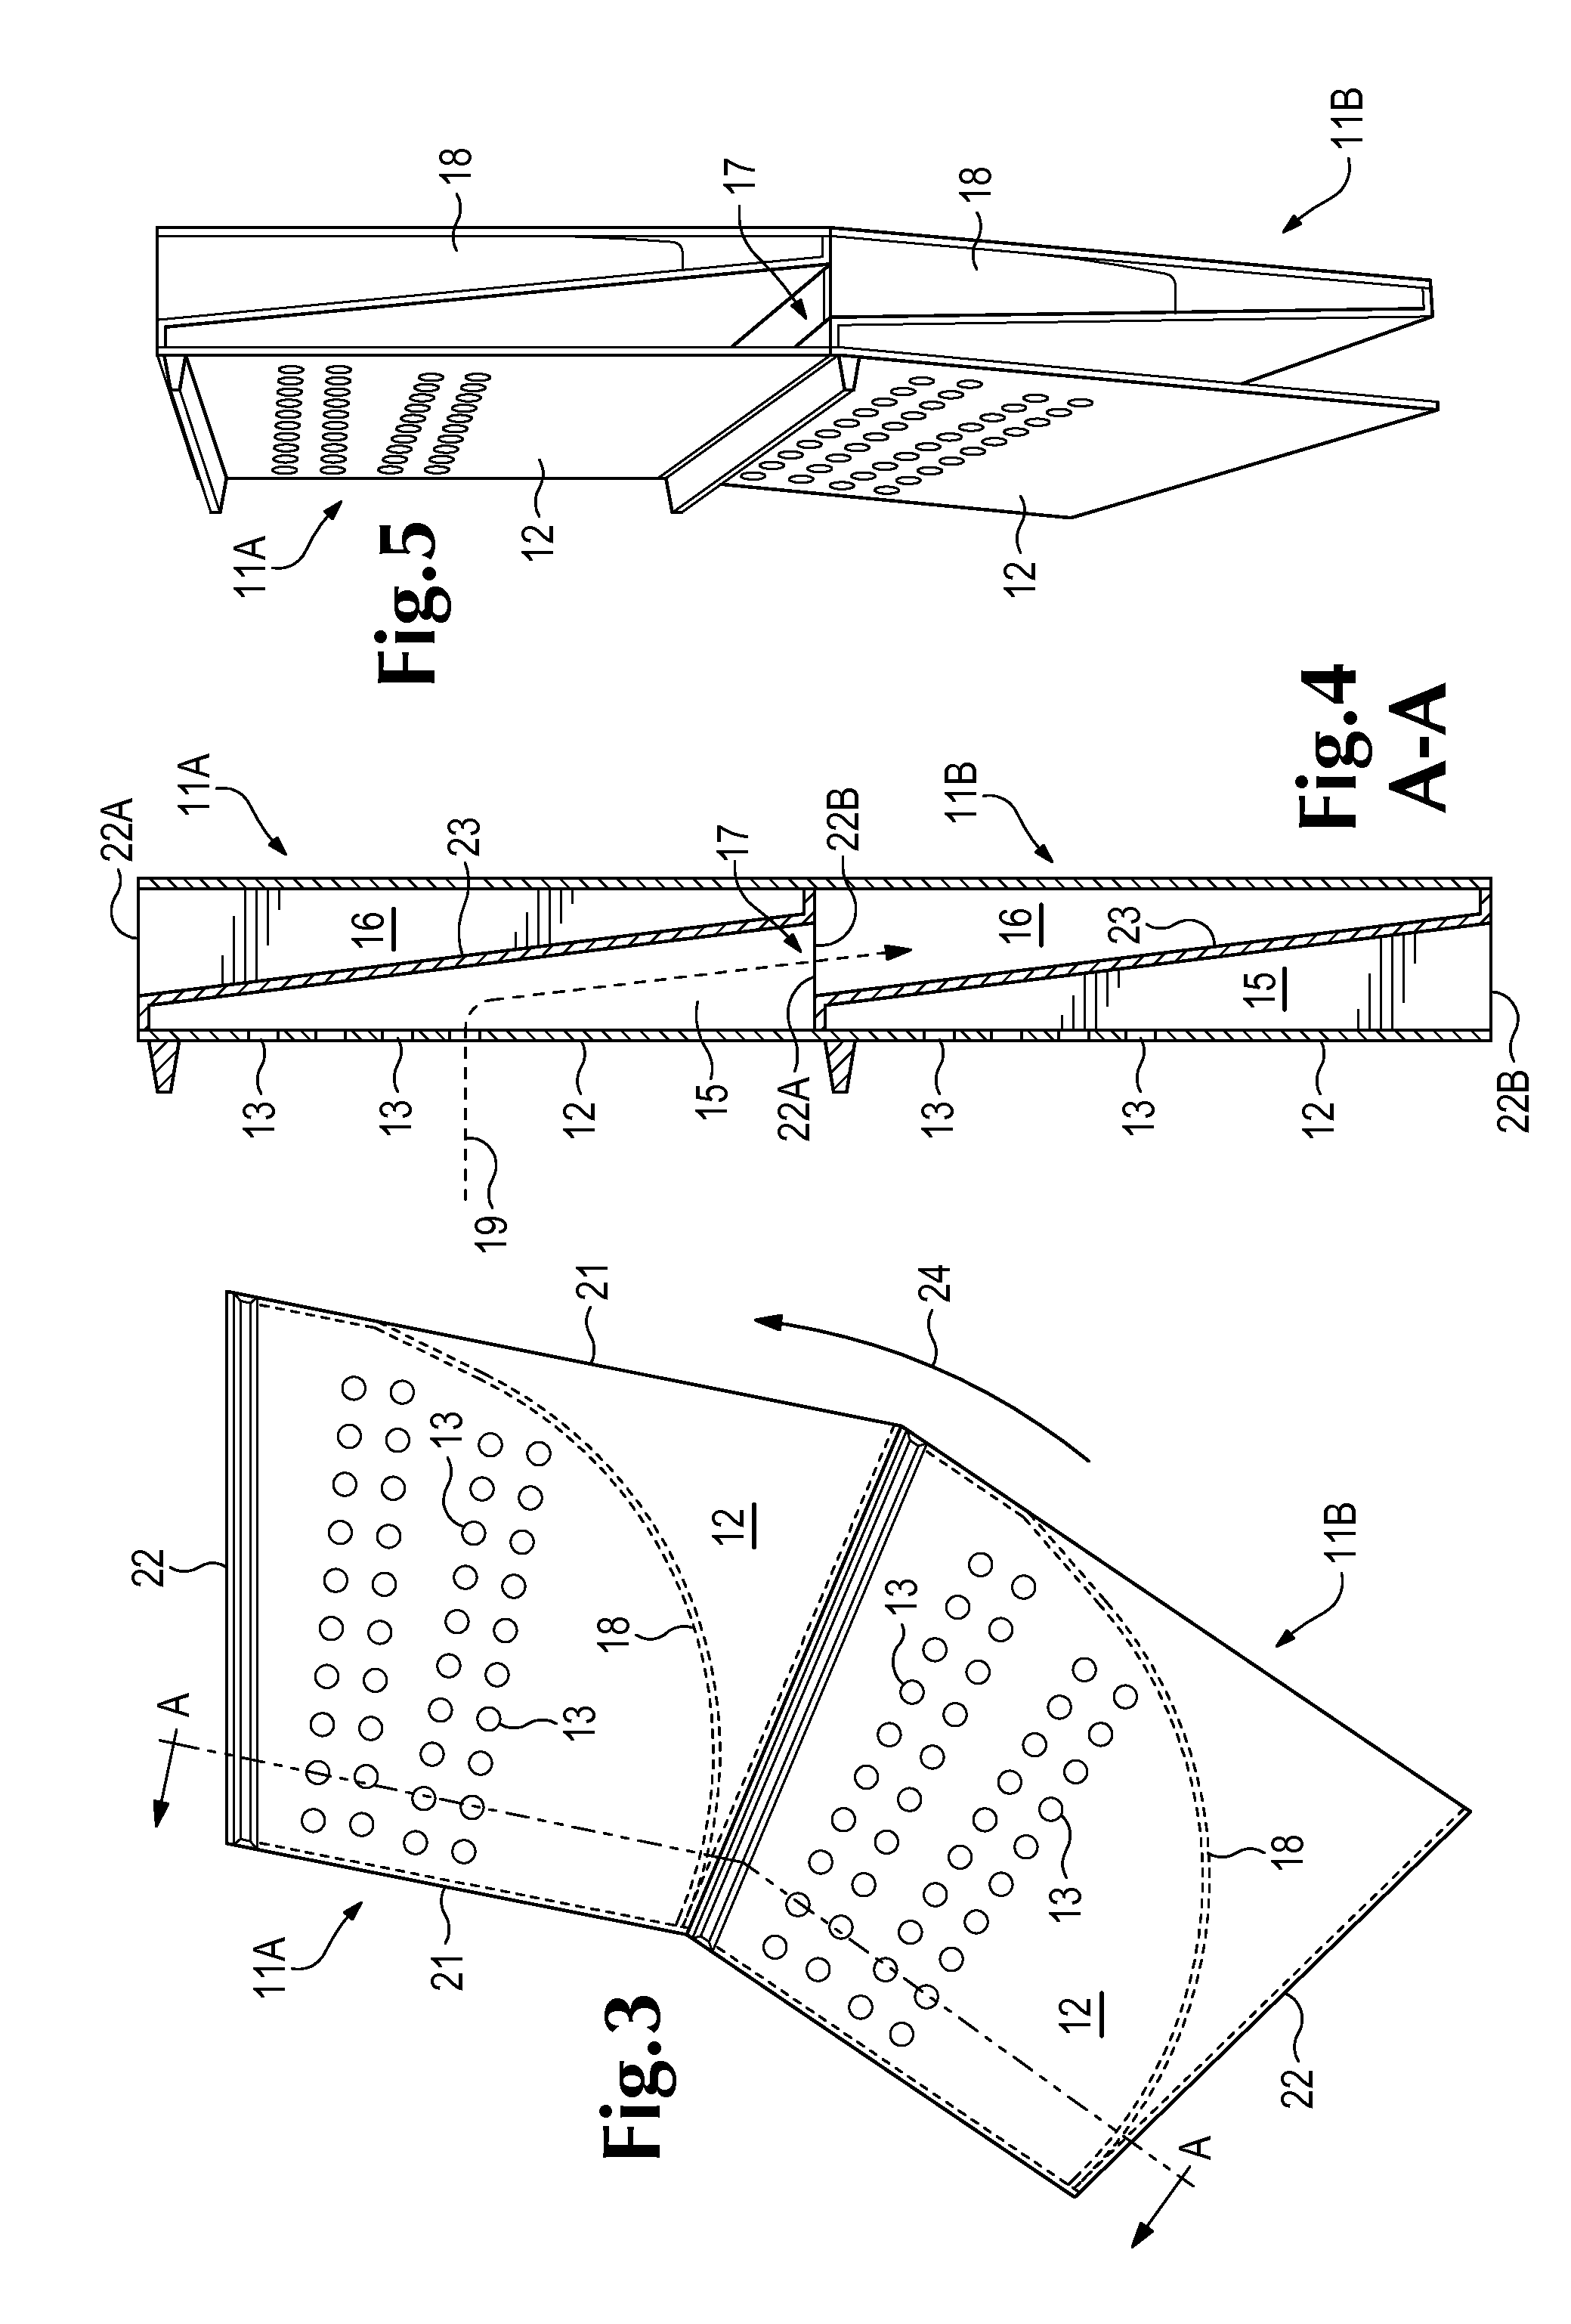 Apparatus for discharging material from a mill